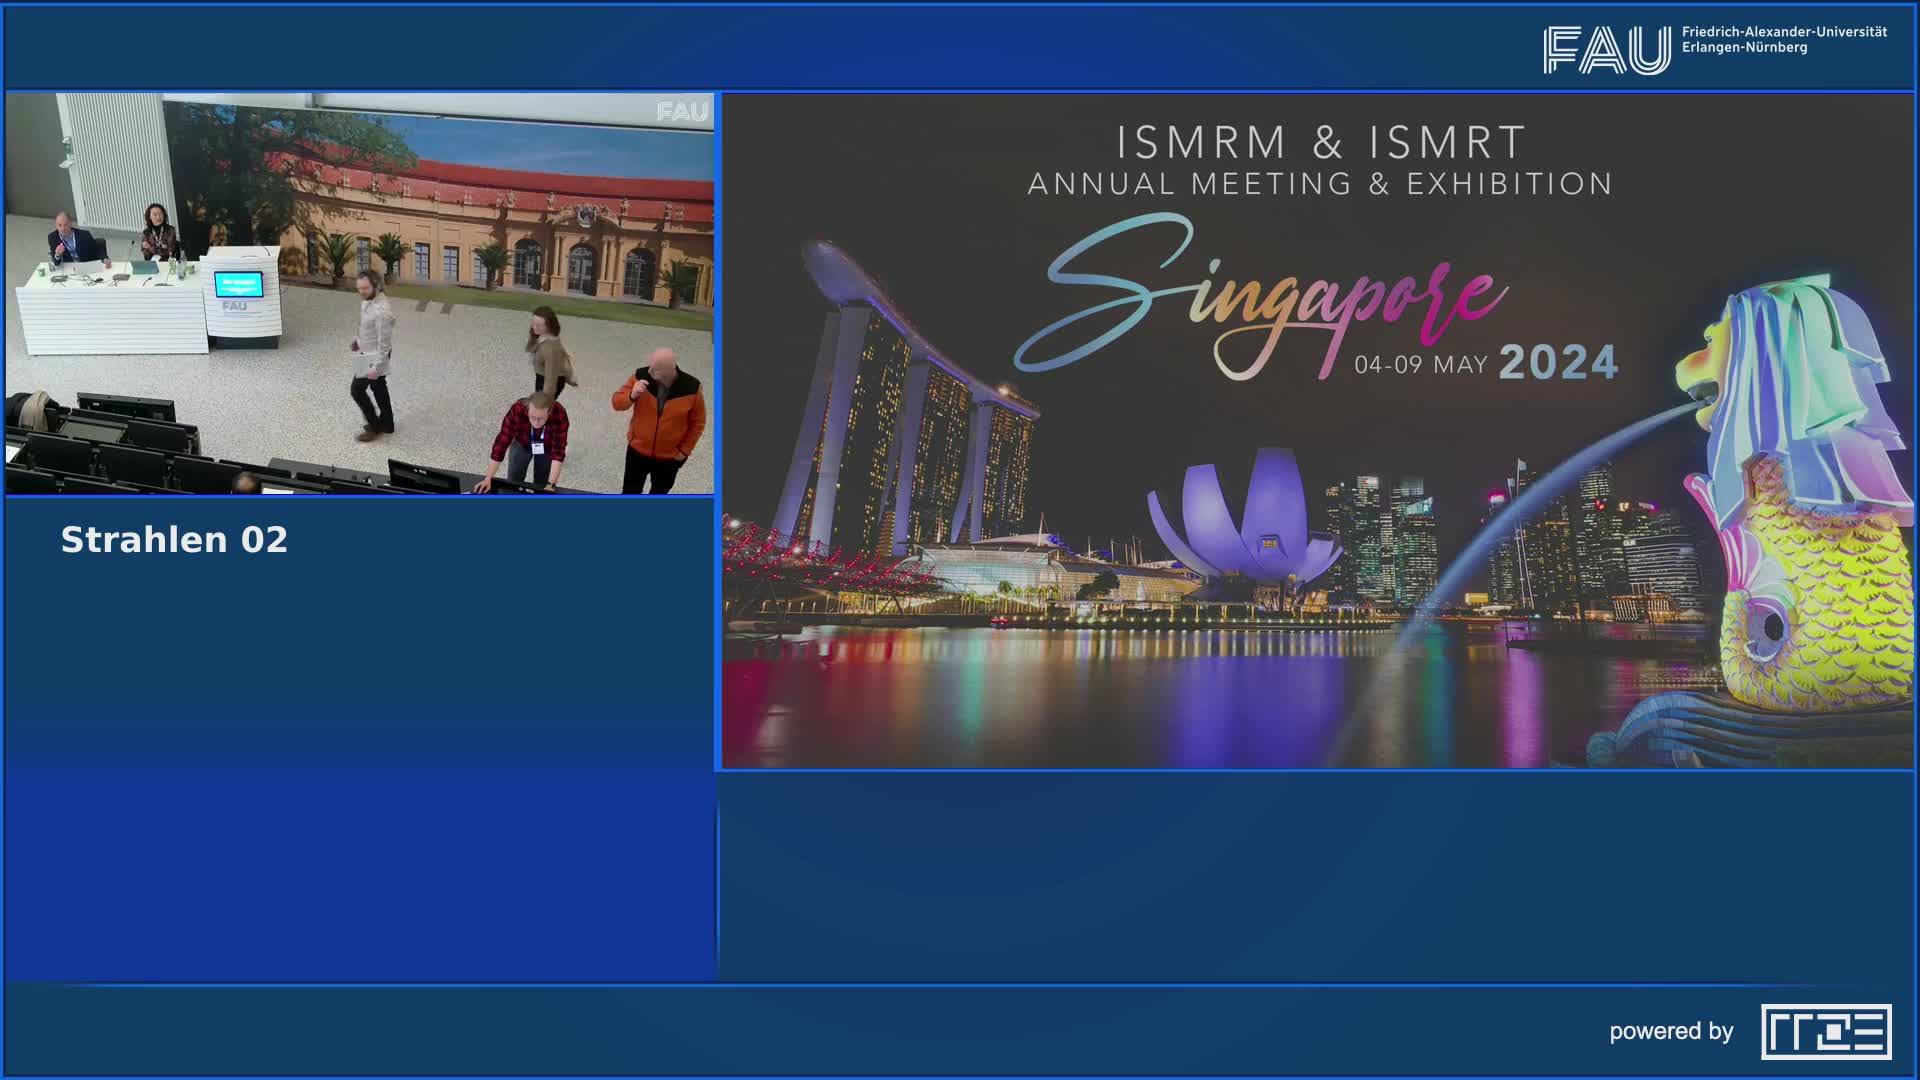 ISMRM & ISMRT preview image